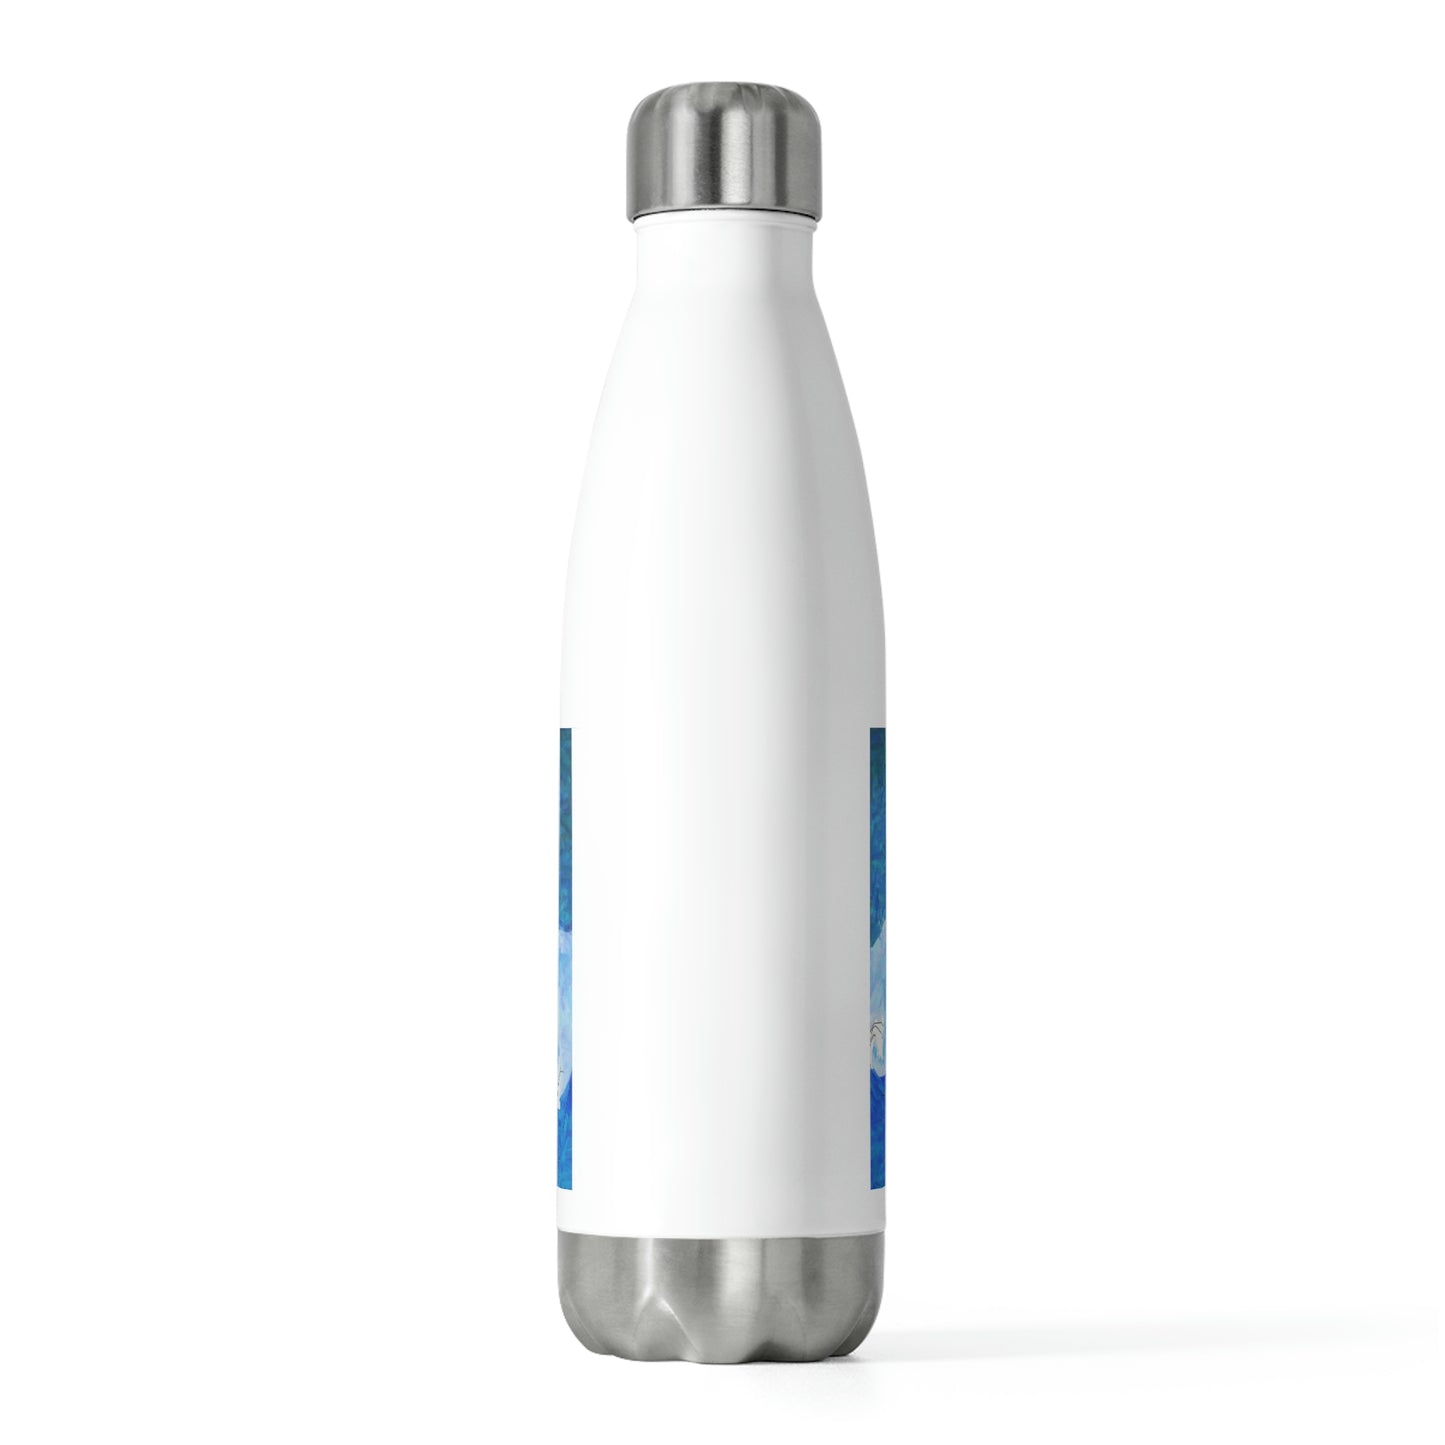 Jumping Fishies 20oz Insulated Bottle